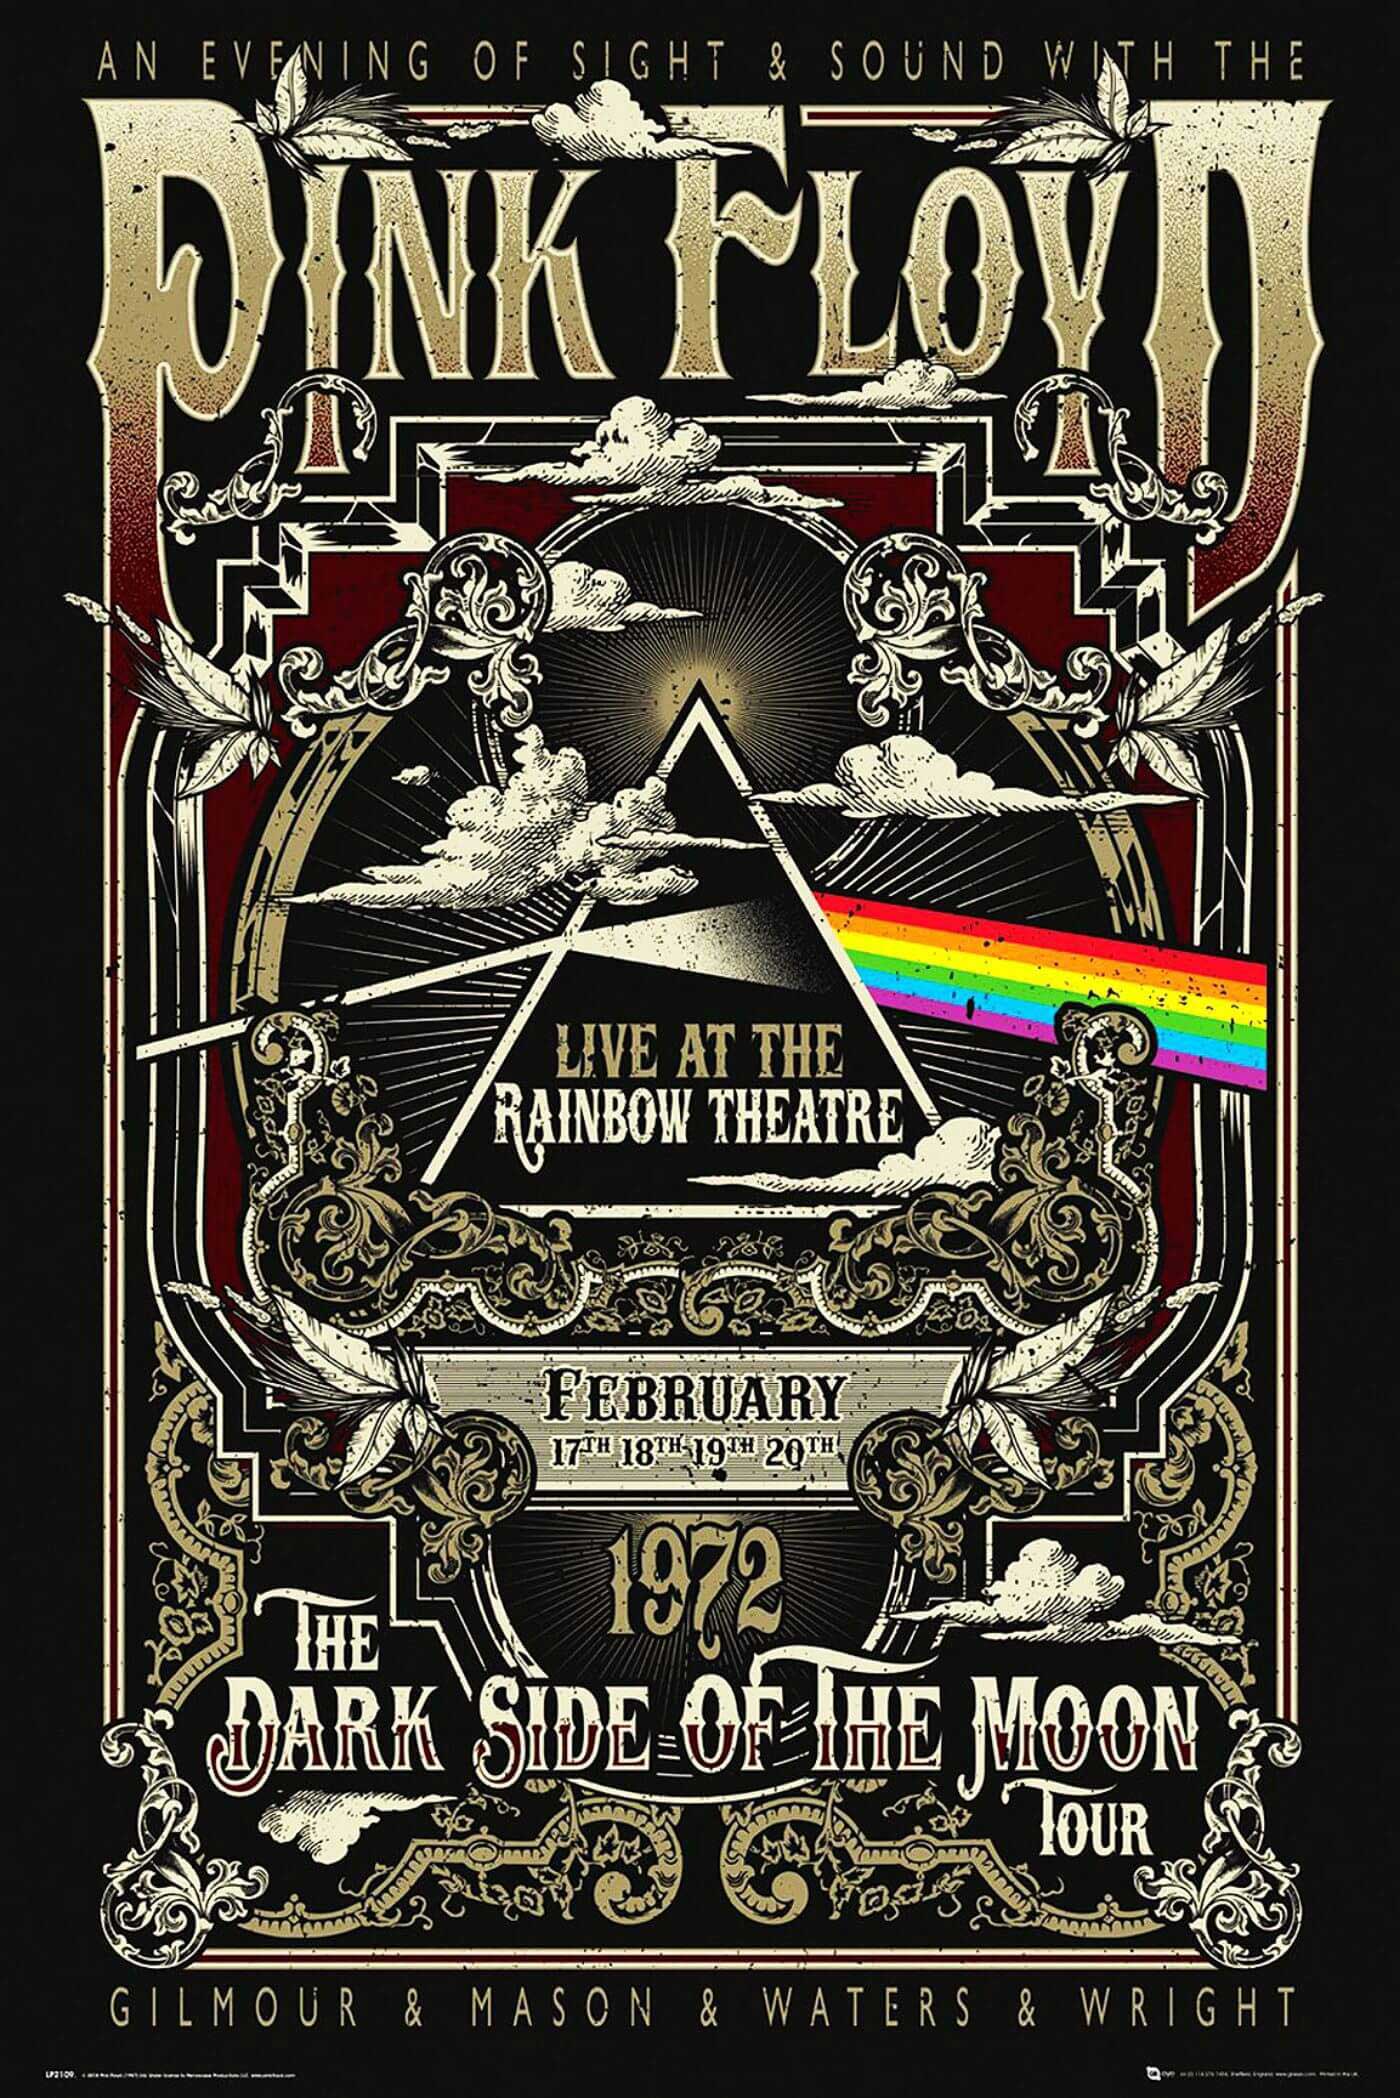 1972 Dark Side of the Moon Tour